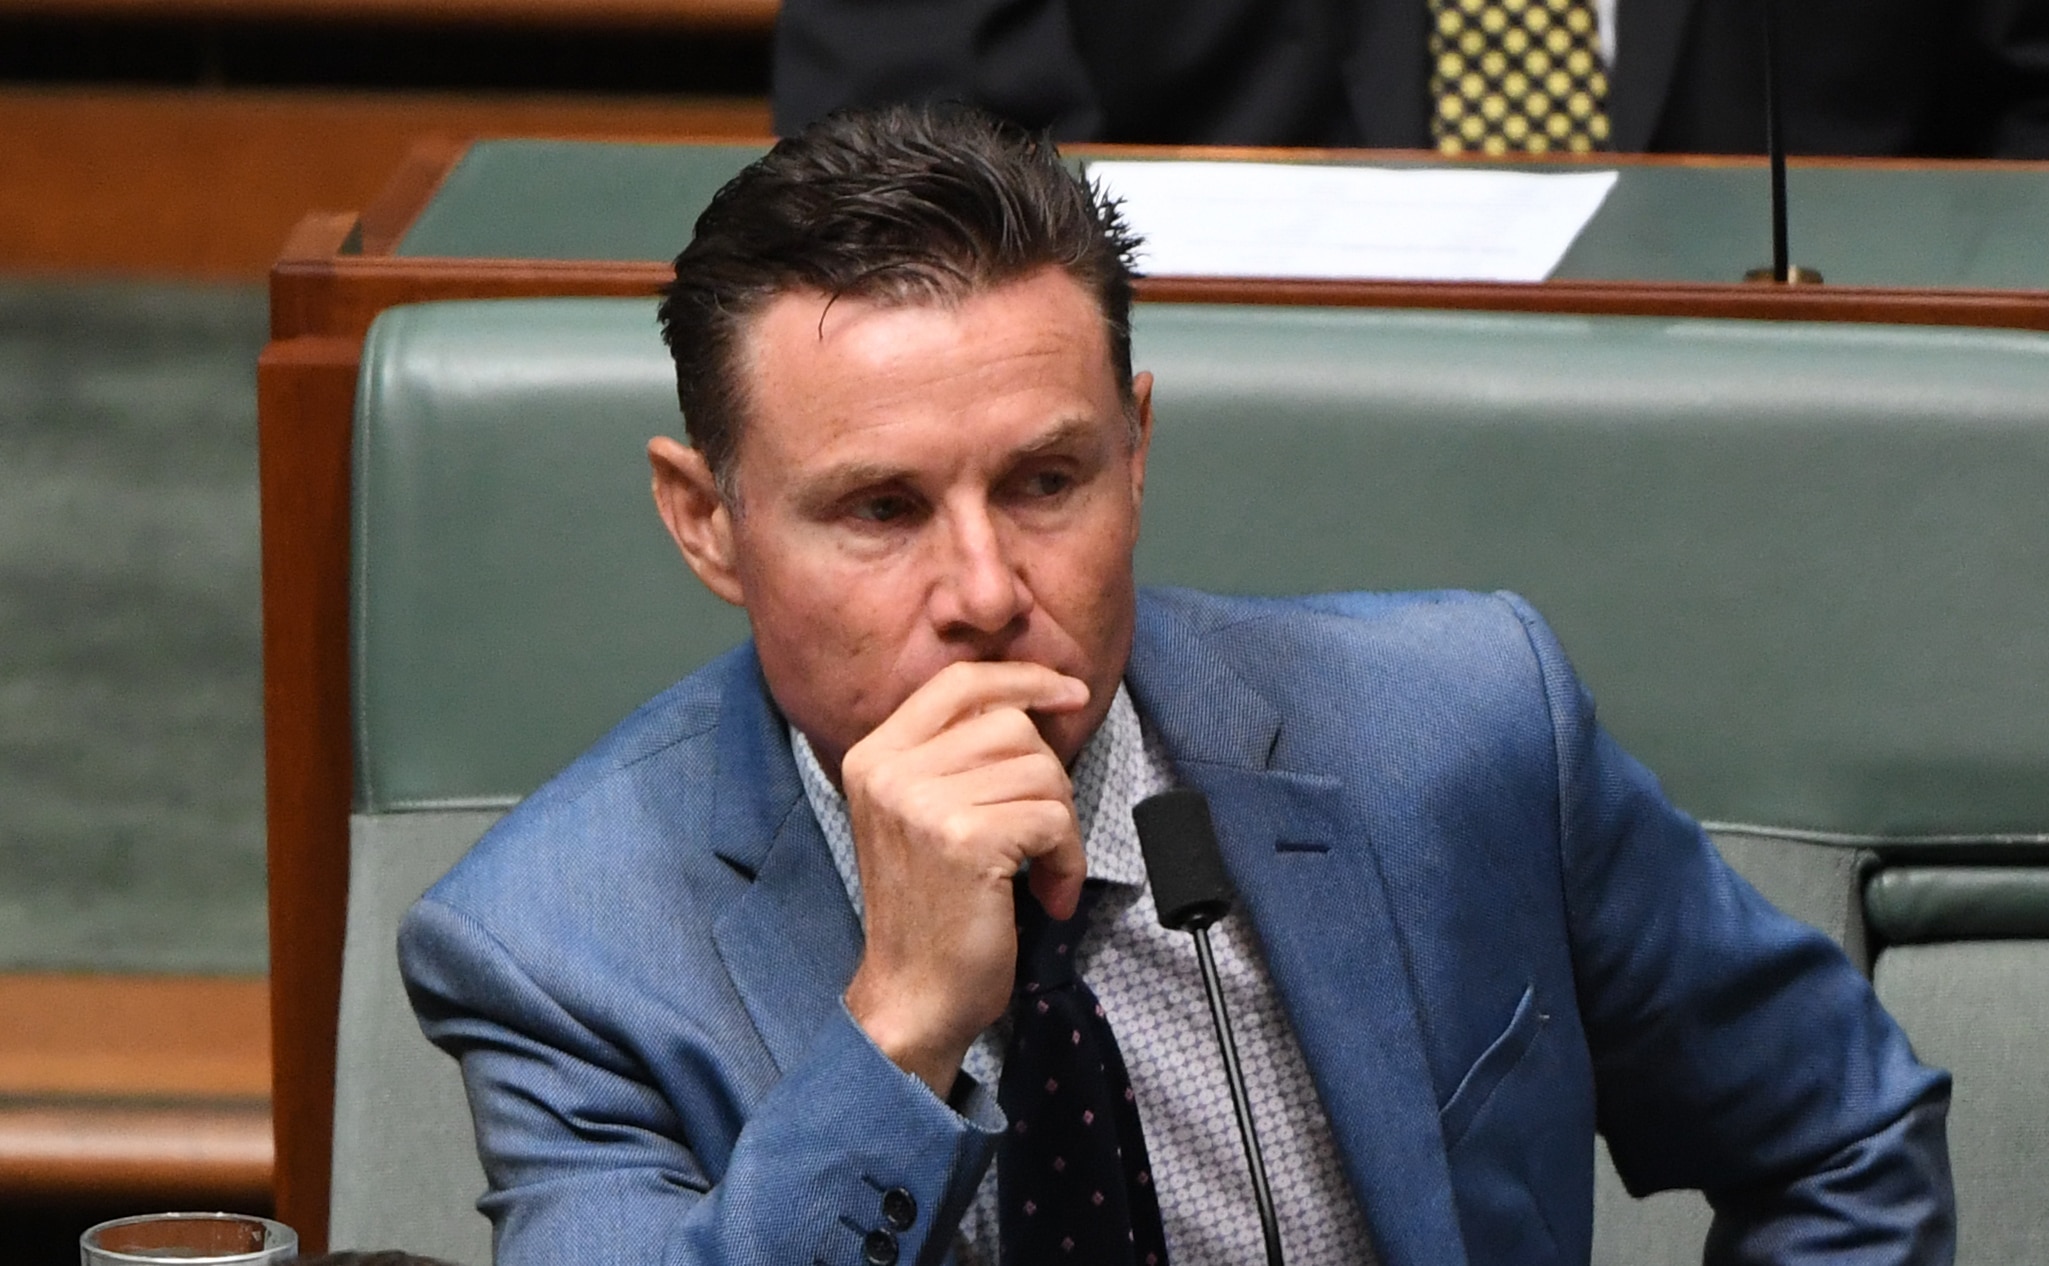 Liberal Member for Bowman Andrew Laming during Question Time in the House of Representatives at Parliament House in Canberra, Wednesday, February 13, 2019.